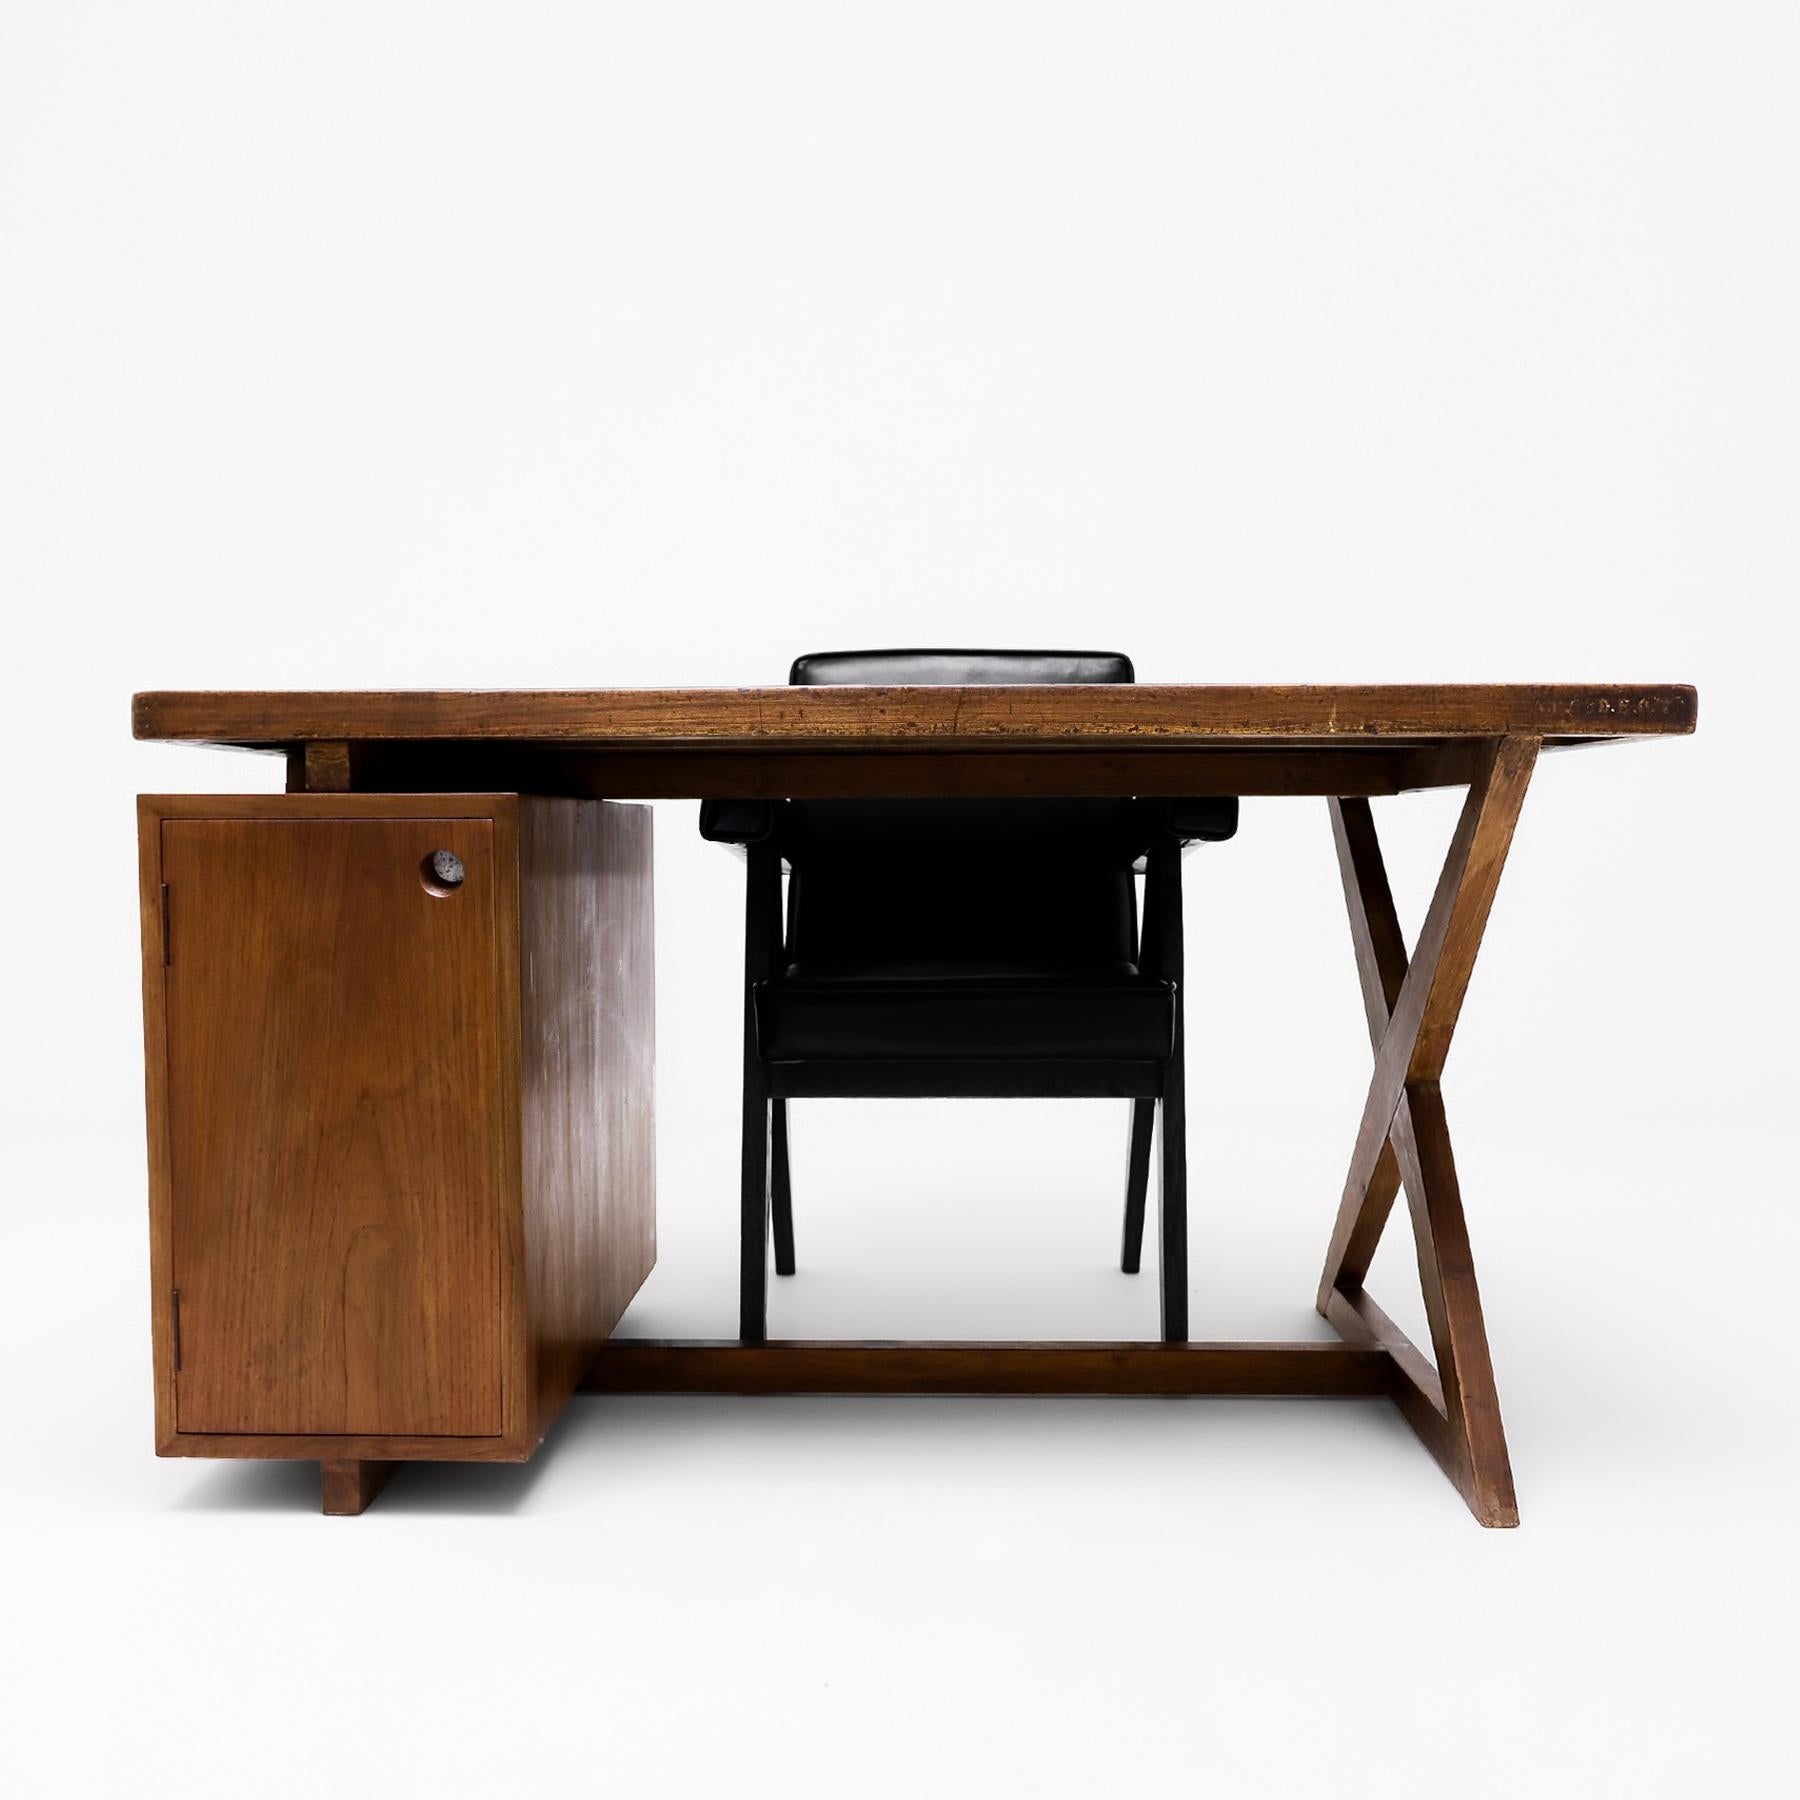 20th Century Pierre Jeanneret  X desk with a Model Pj Si 30A Committee Chair, Chandigarh, 60s For Sale